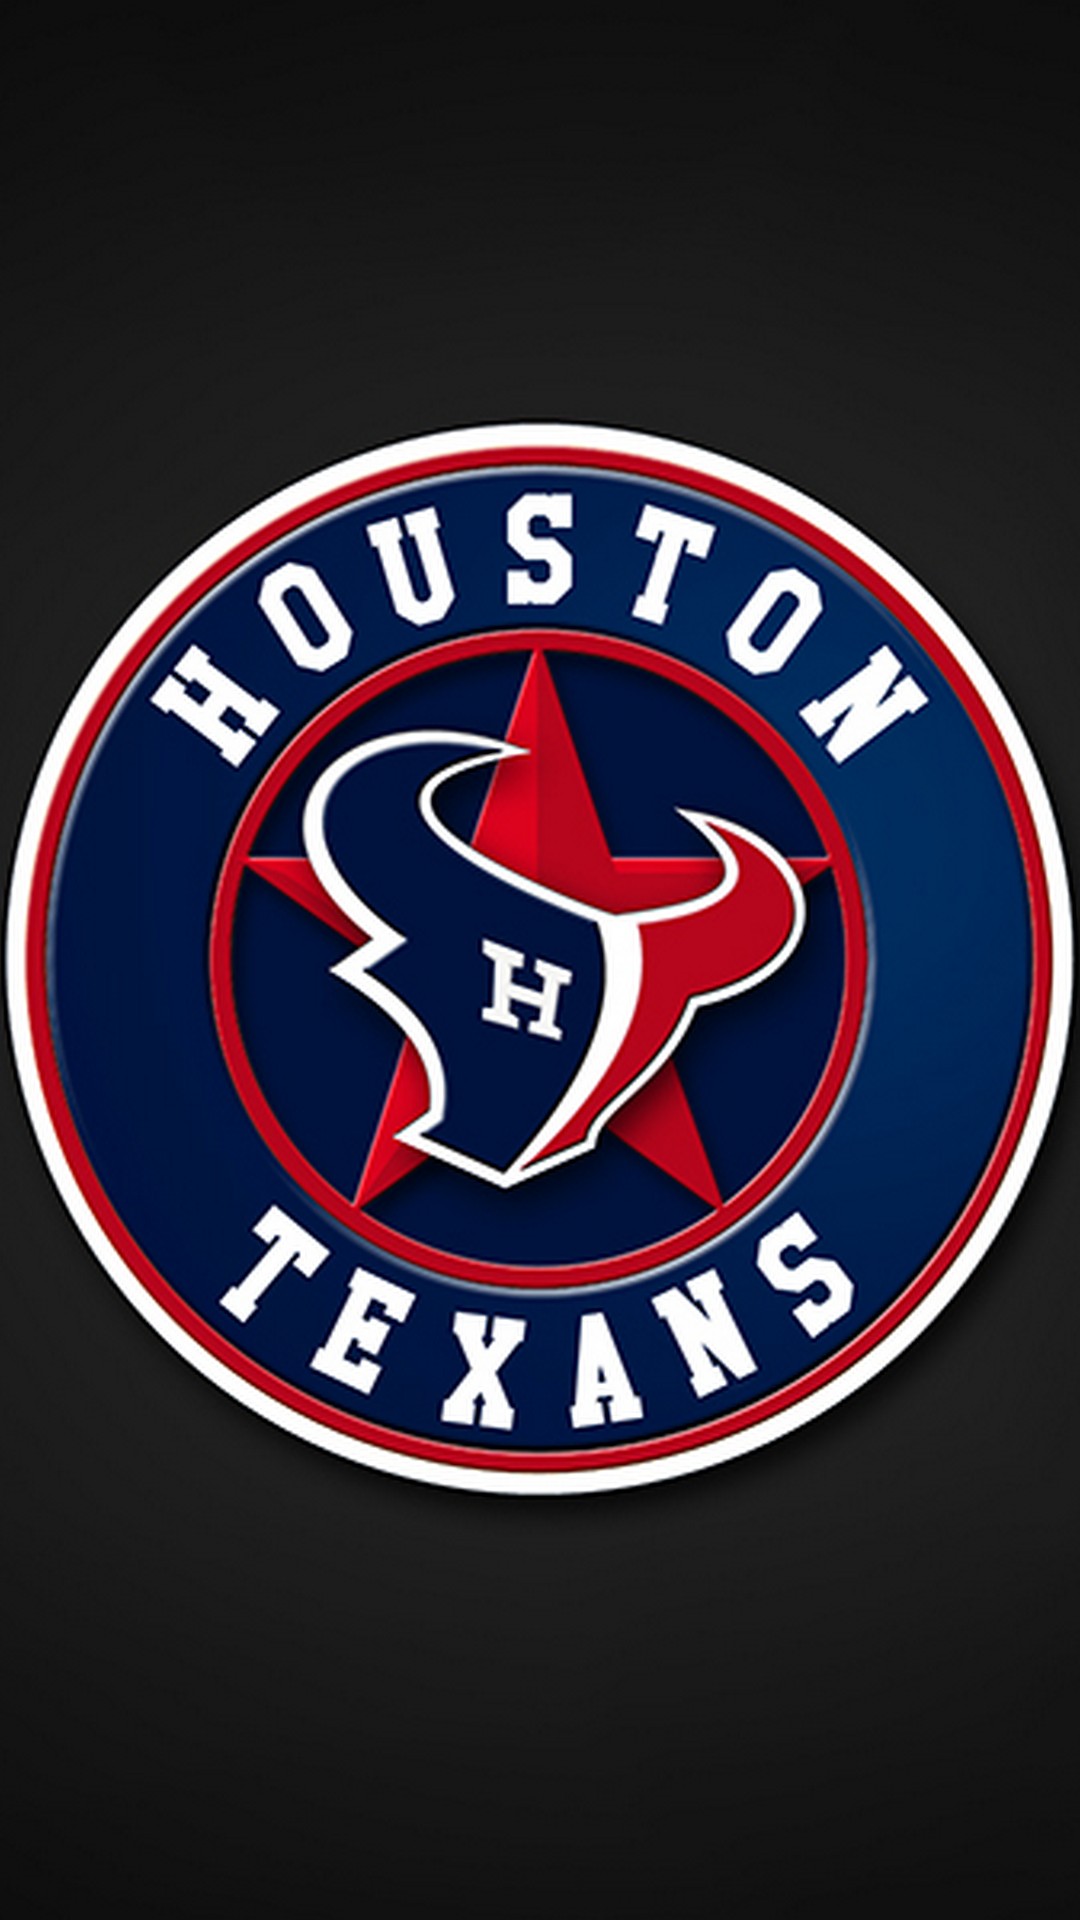 Houston Texans iPhone Wallpaper Home Screen with high-resolution 1080x1920 pixel. Download and set as wallpaper for Apple iPhone X, XS Max, XR, 8, 7, 6, SE, iPad, Android